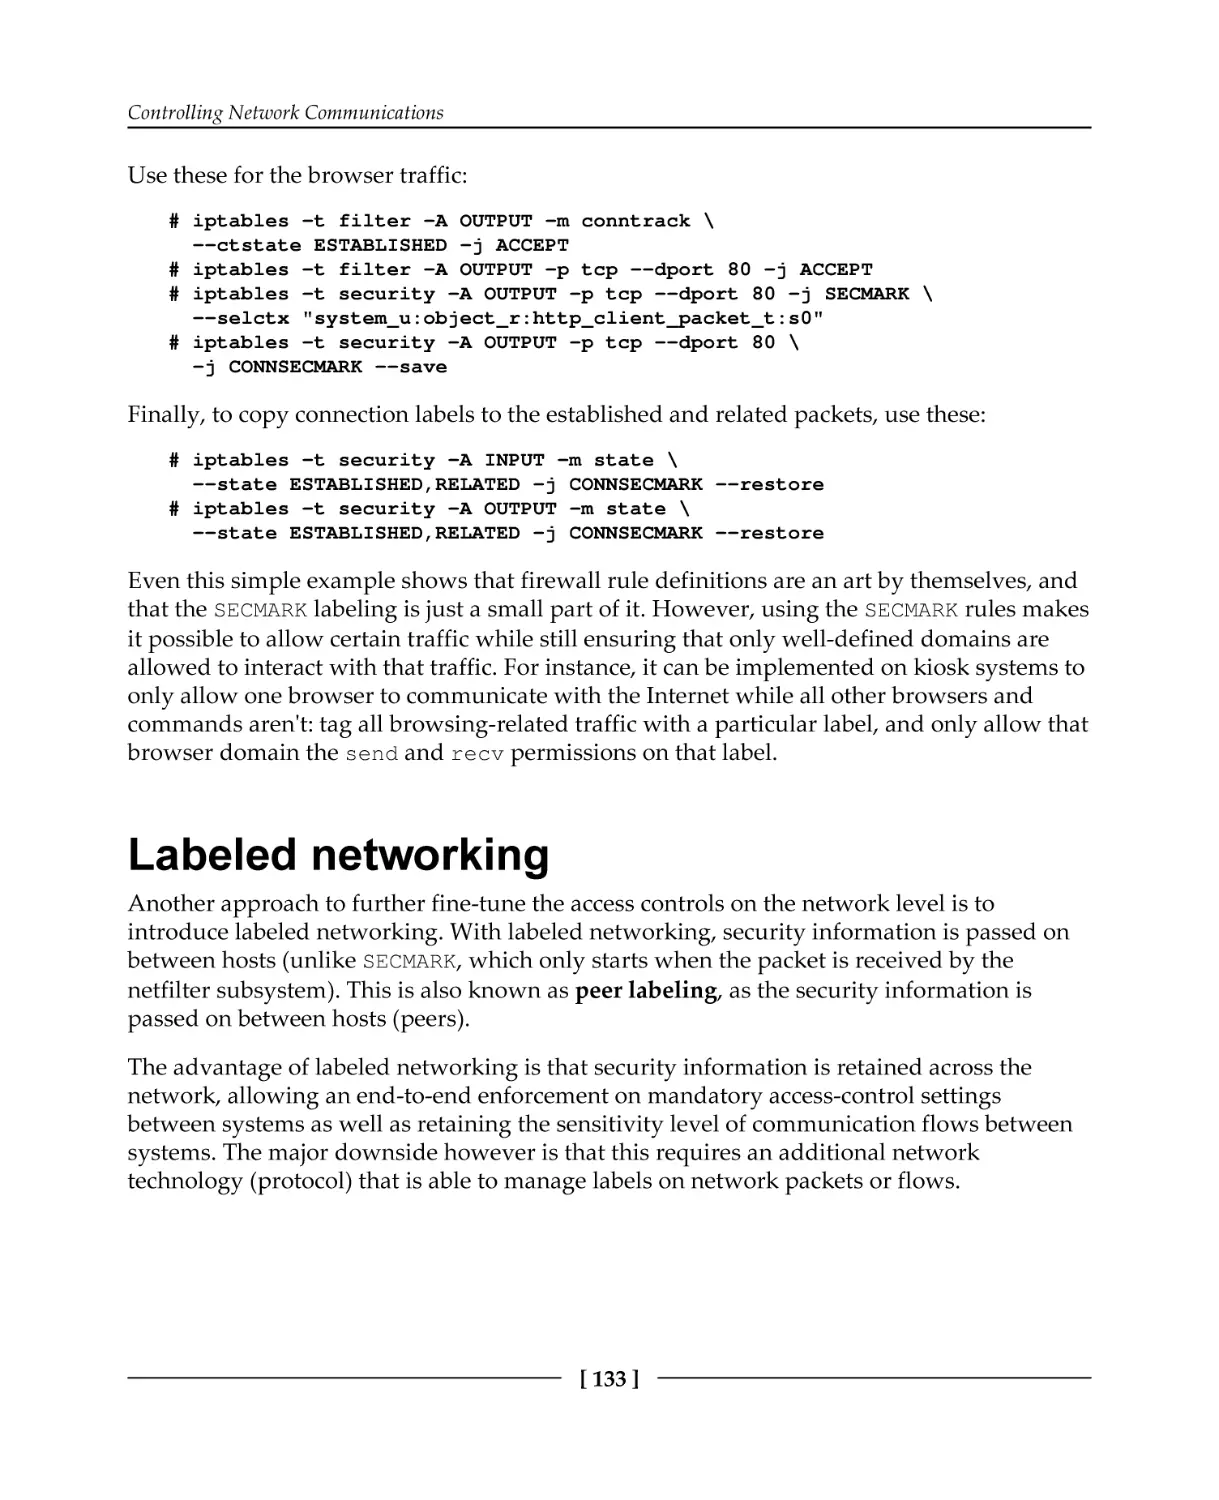 Labeled networking